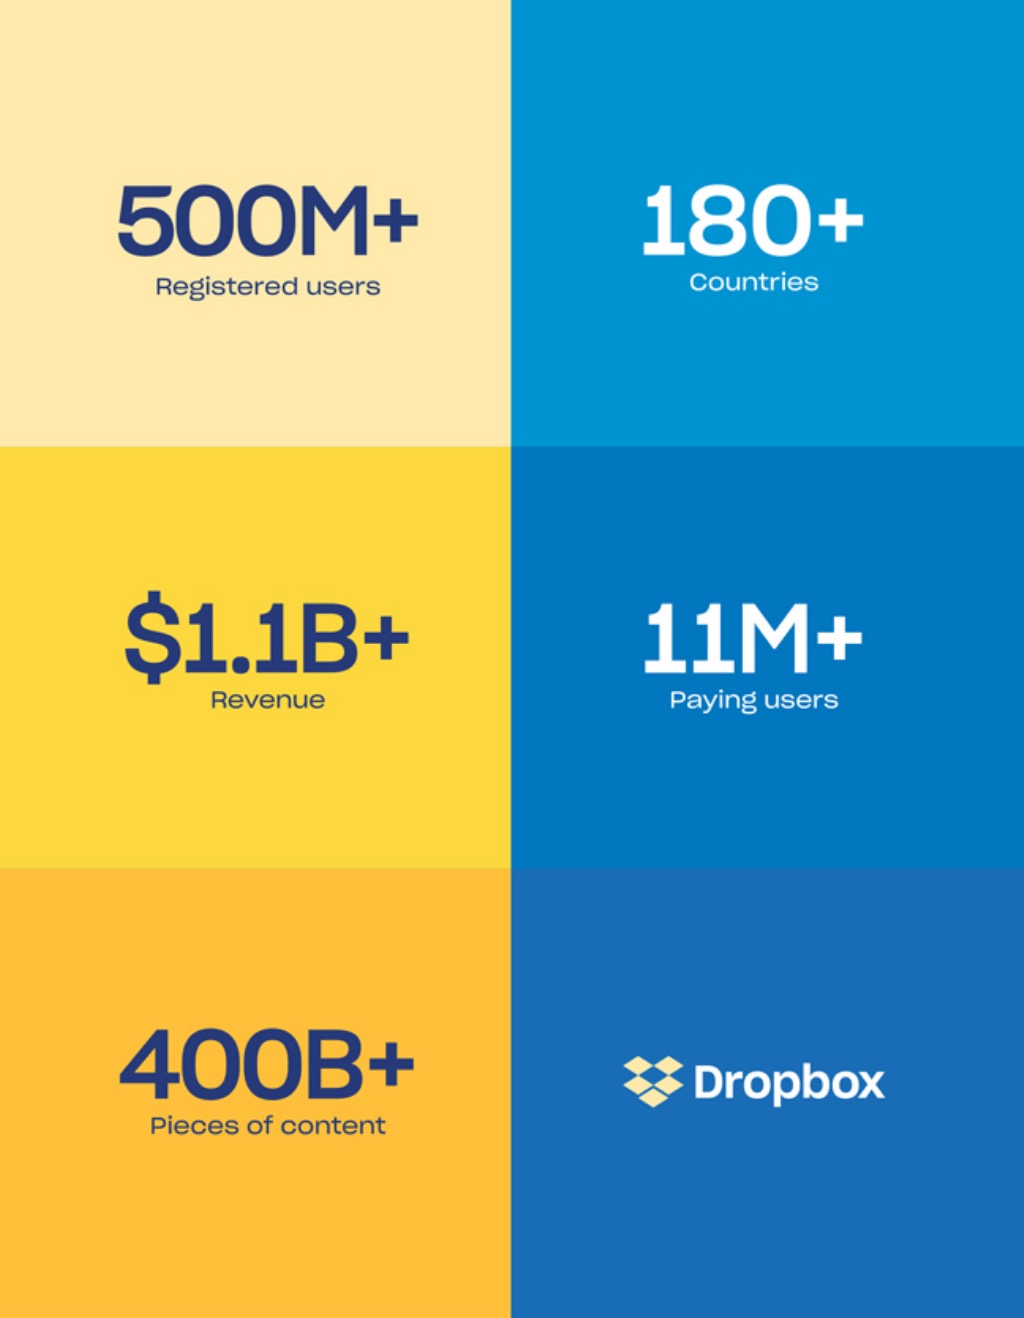 Dropbox Files for IPO